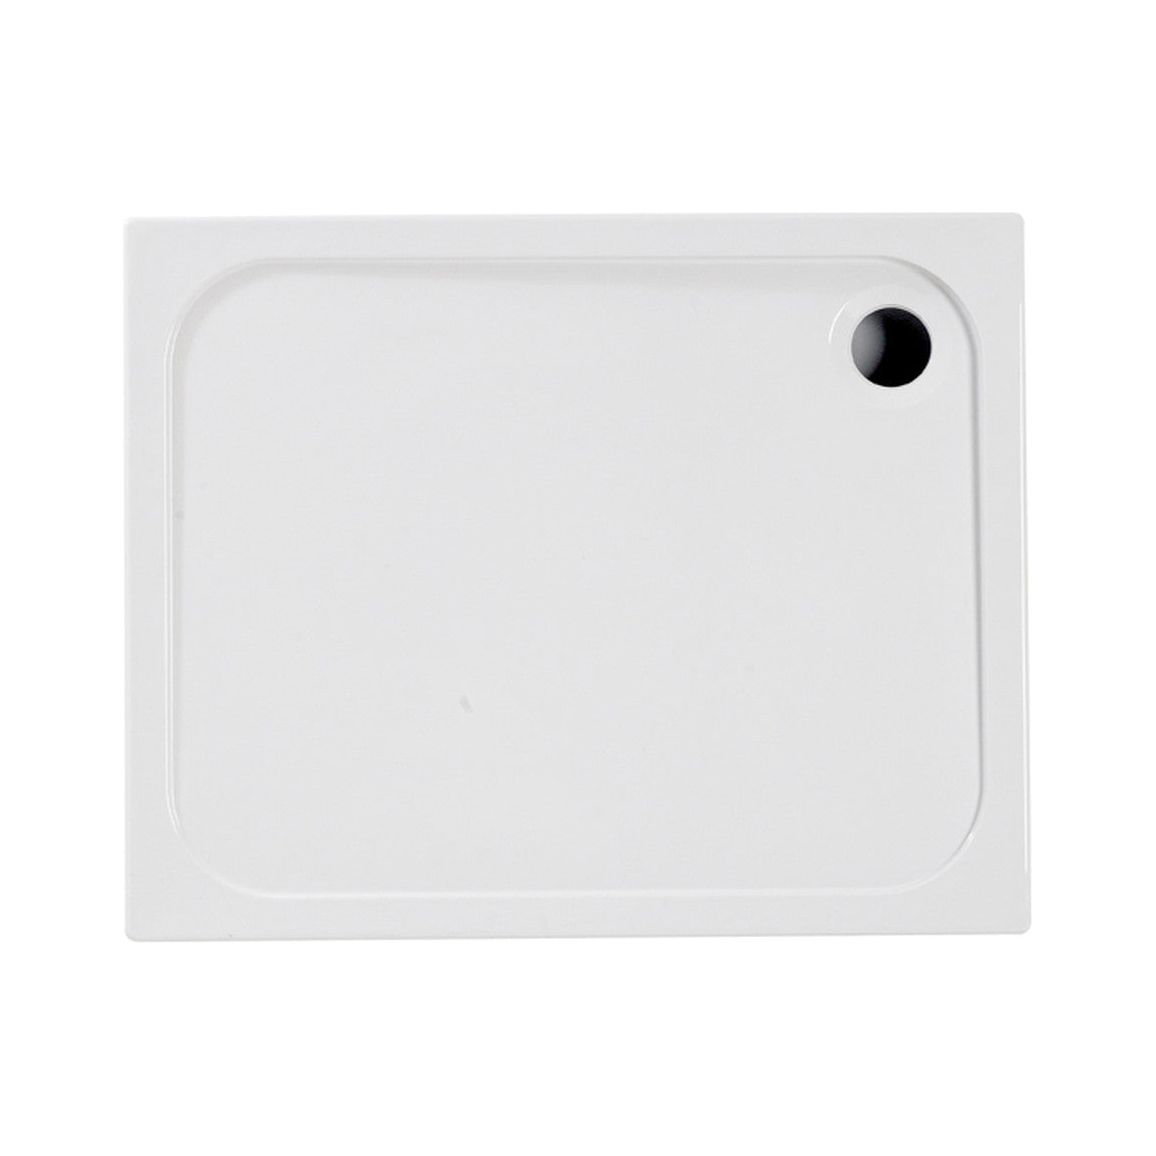 45mm Low Profile 1600x700mm Rectangular Tray & Waste